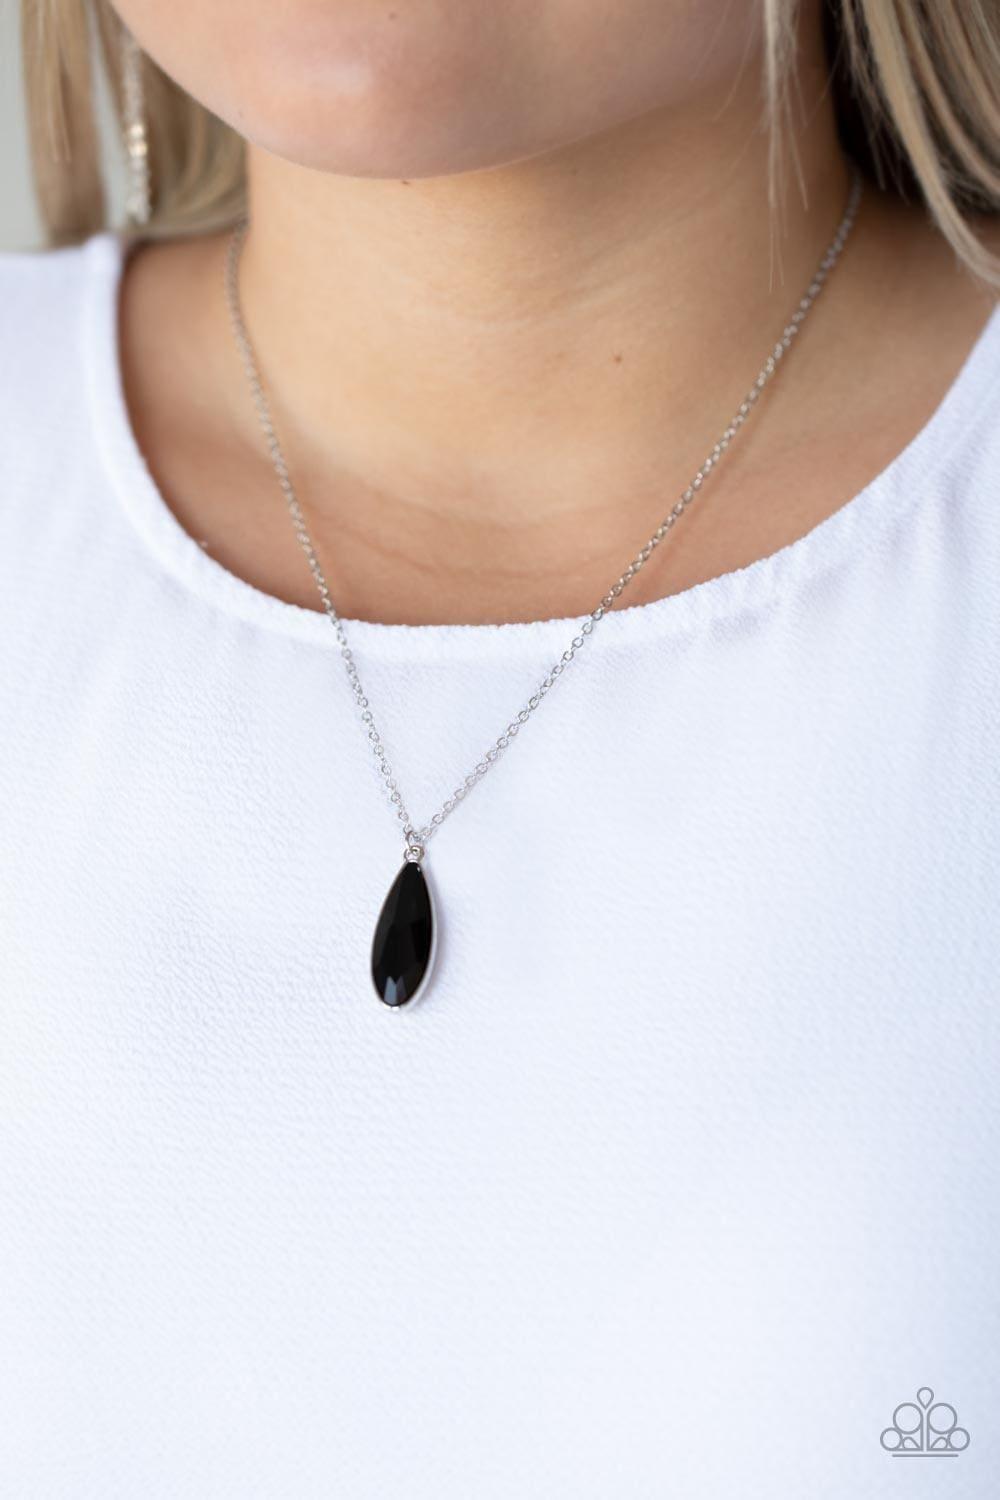 Paparazzi Accessories - Prismatically Polished - Black Necklace - Bling by JessieK